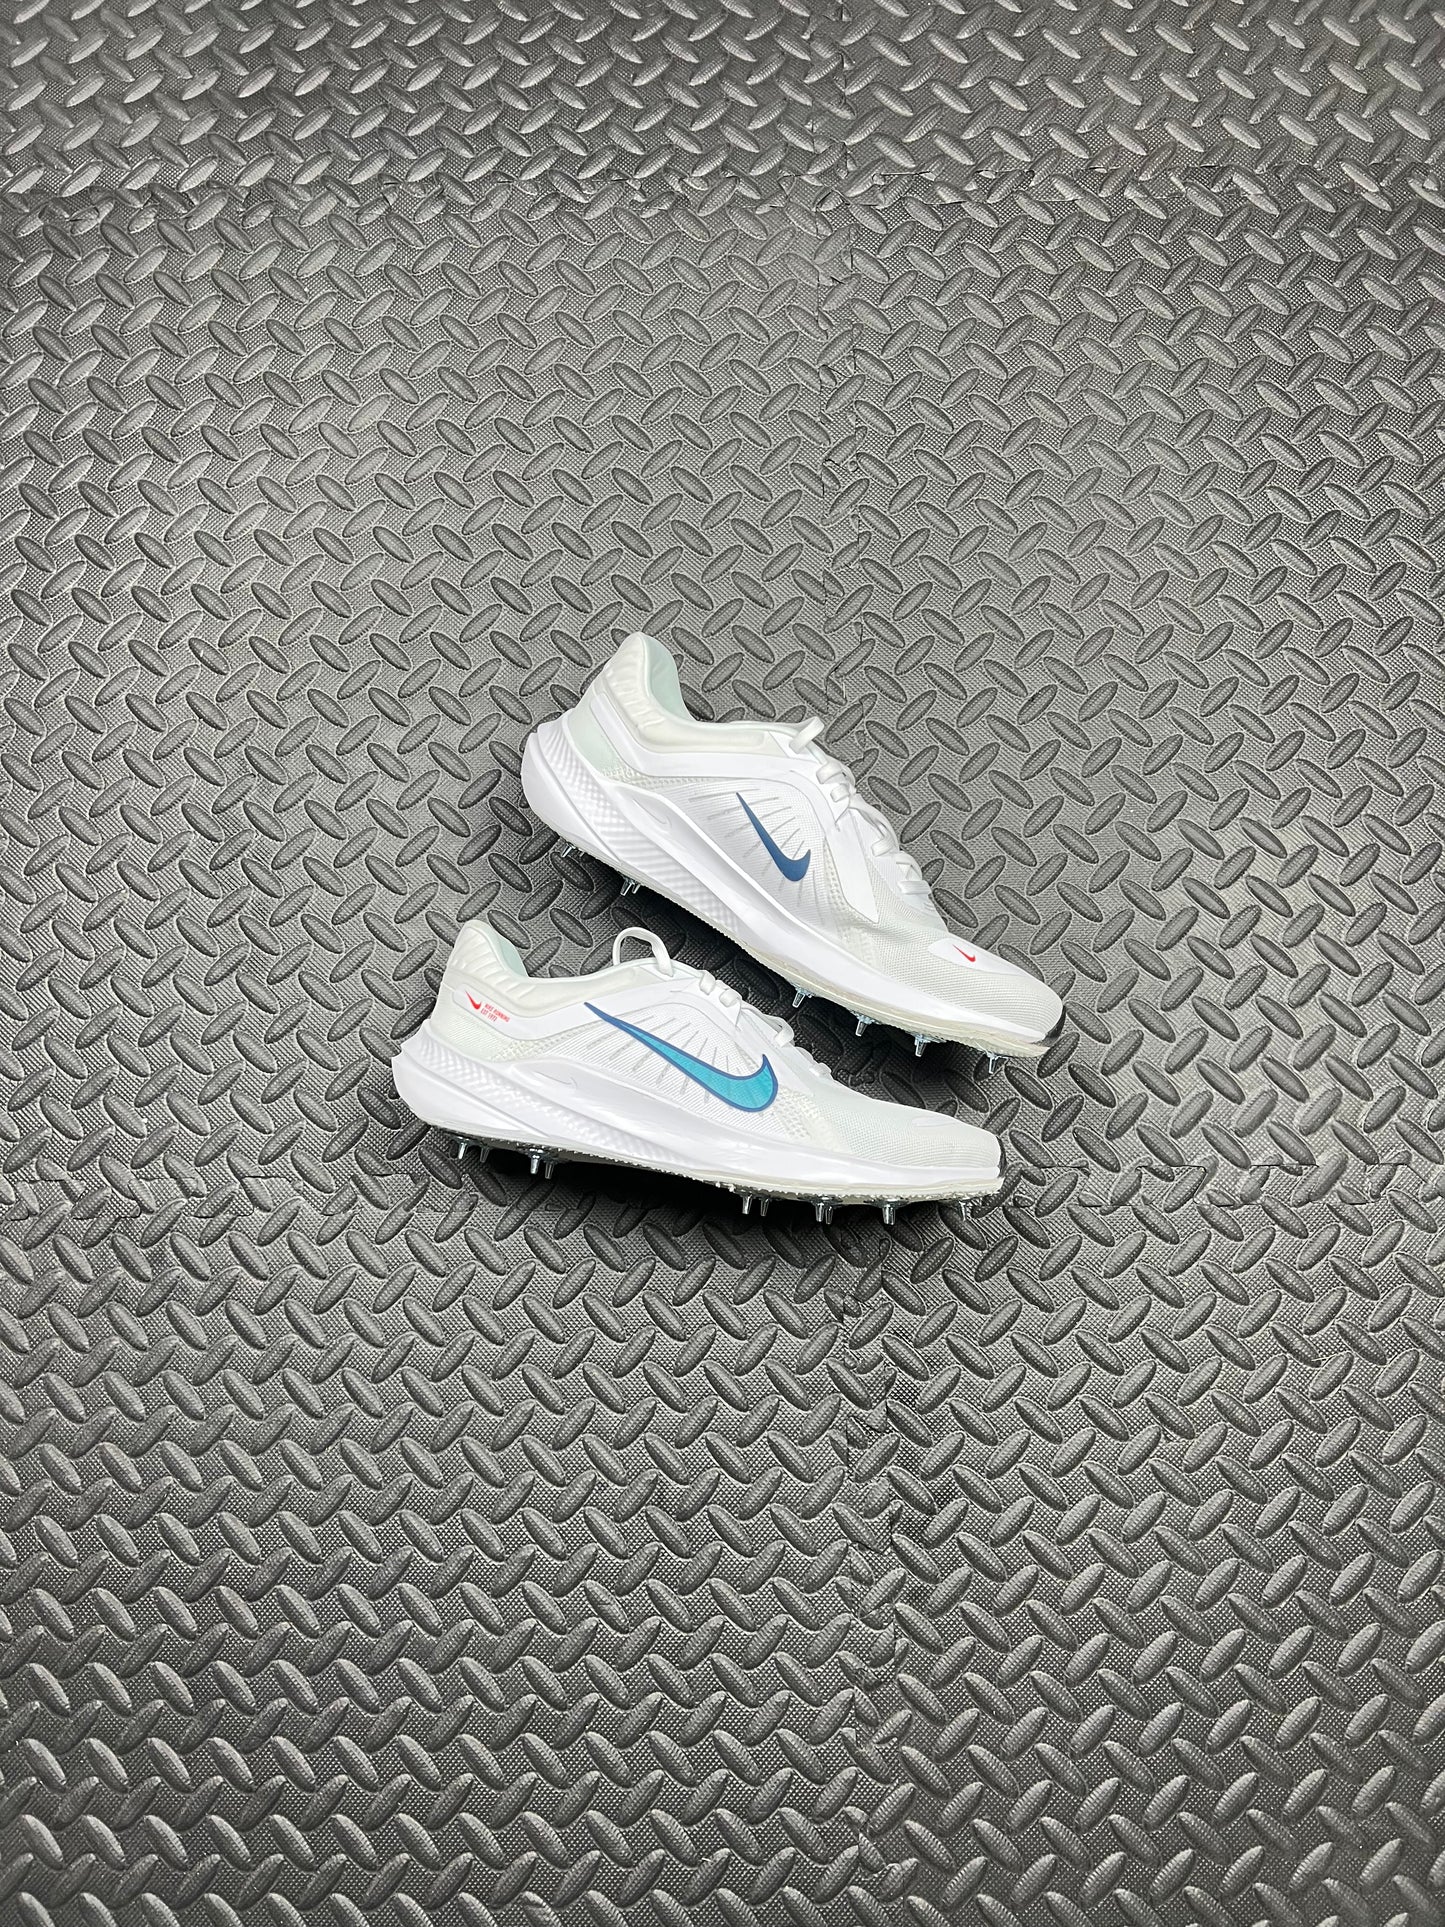 Nike Quest 5 Spiked Trainers